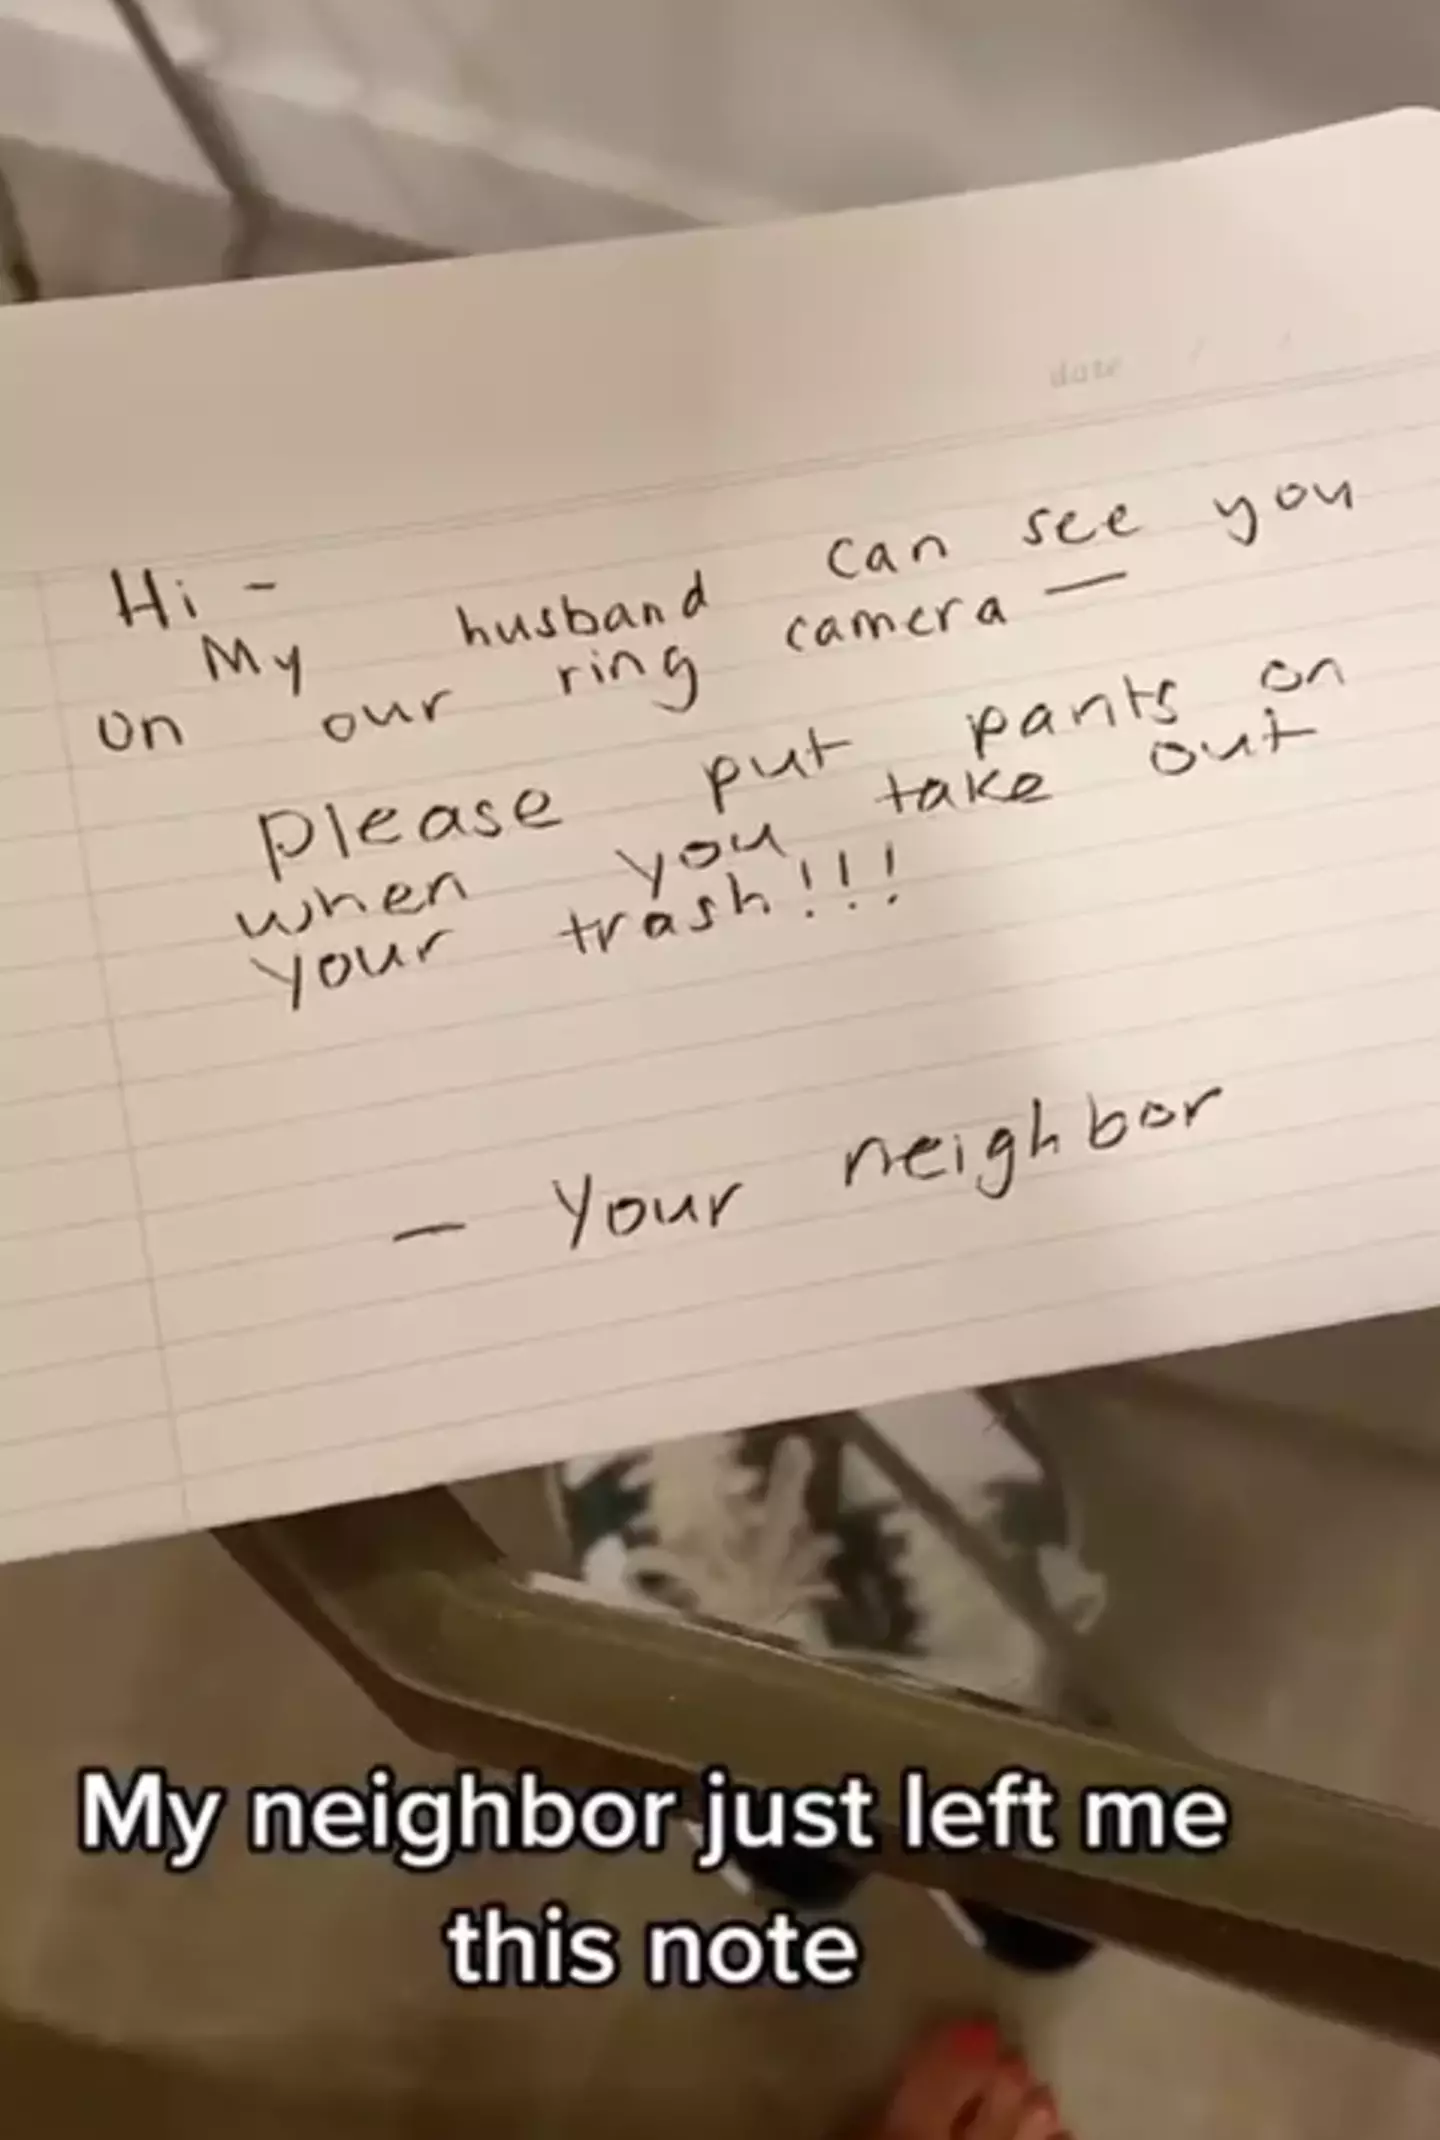 The note was sent after the TikToker took her bins out.